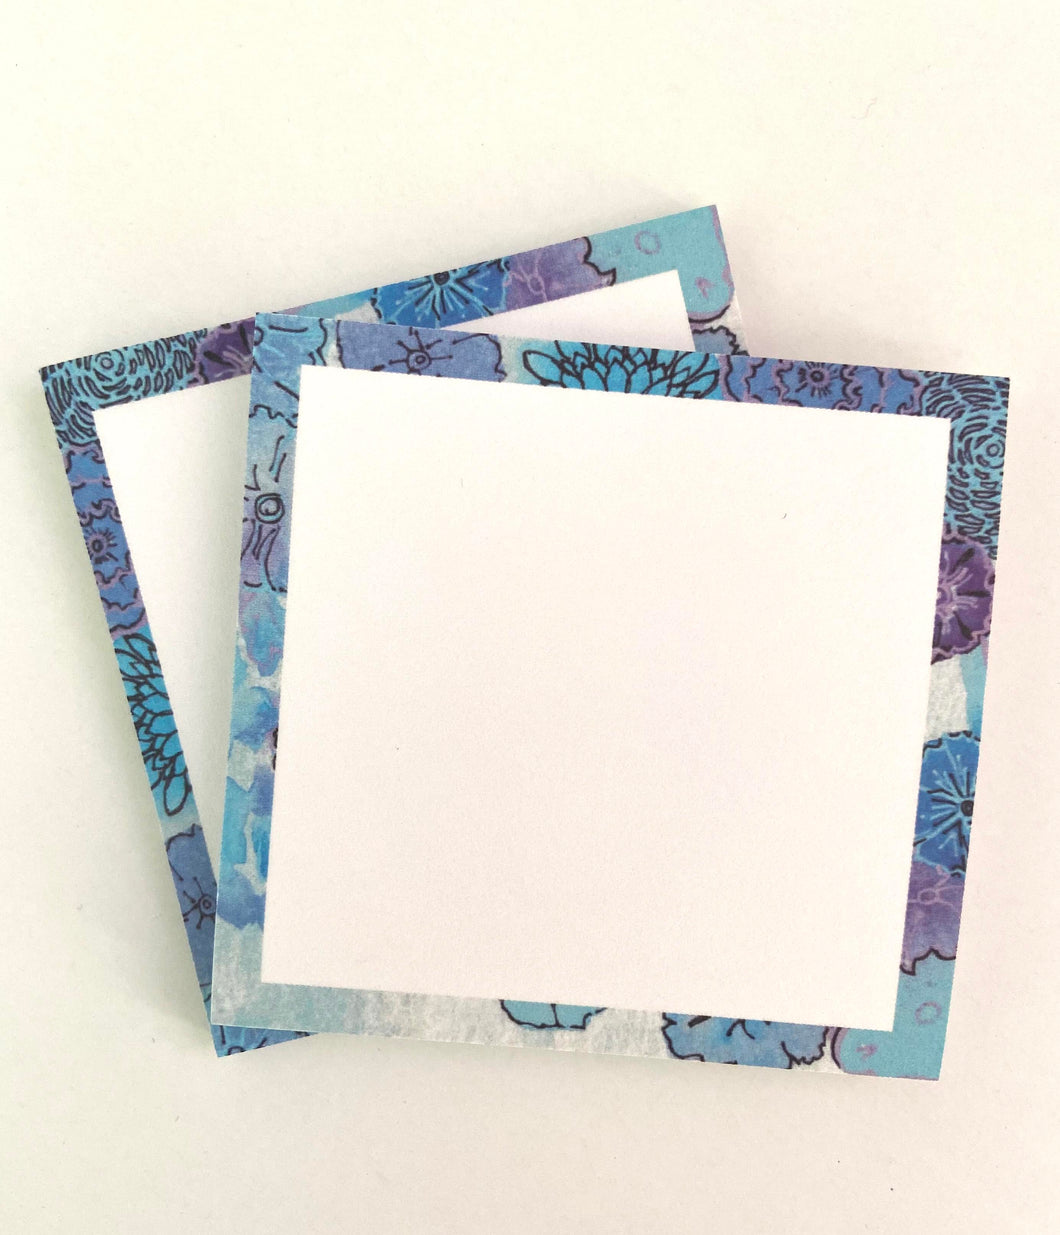 Sticky Notes-Set of 2 - Blue Meadow